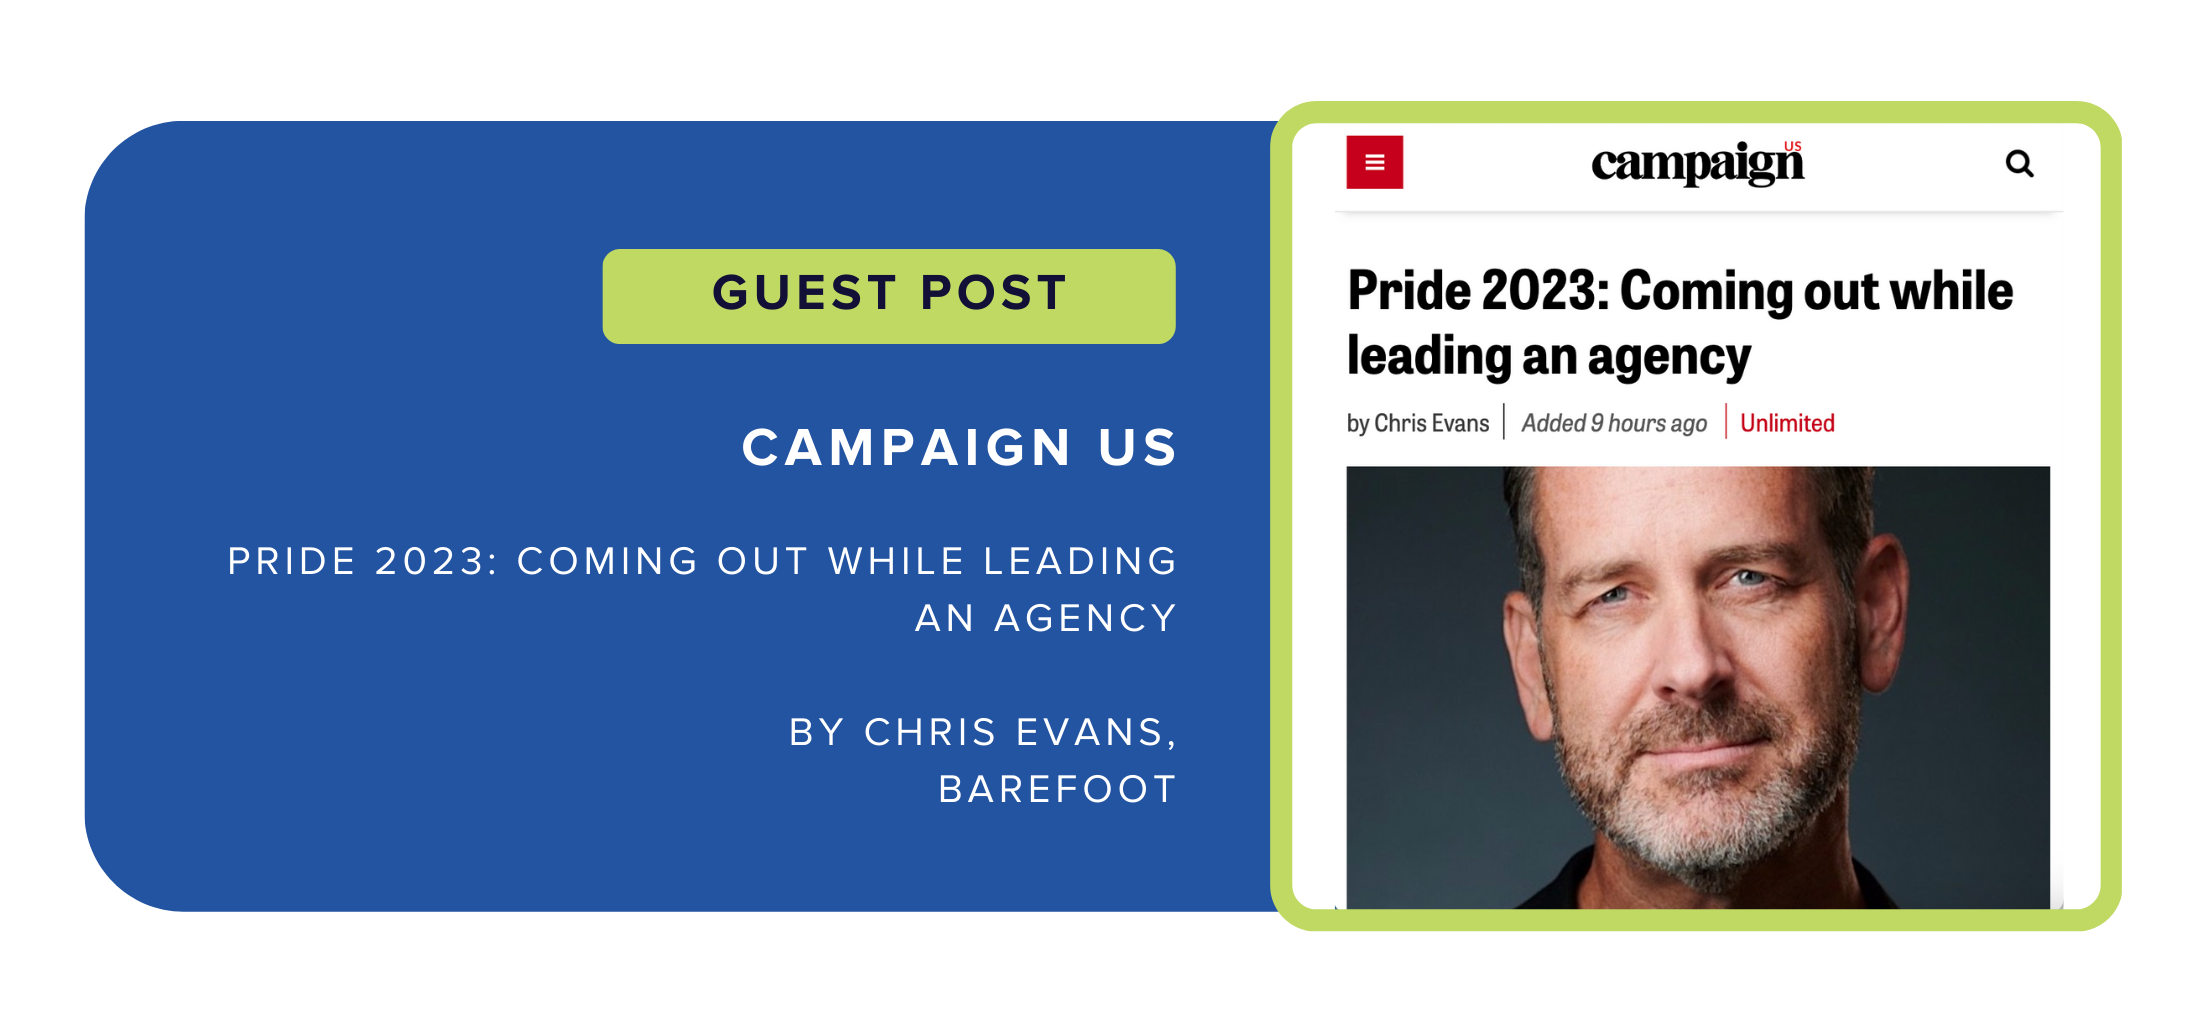 Guest Post in Campaign US: "Pride 2023: Coming Out While Leading an Agency" by Chris Evans, Barefoot